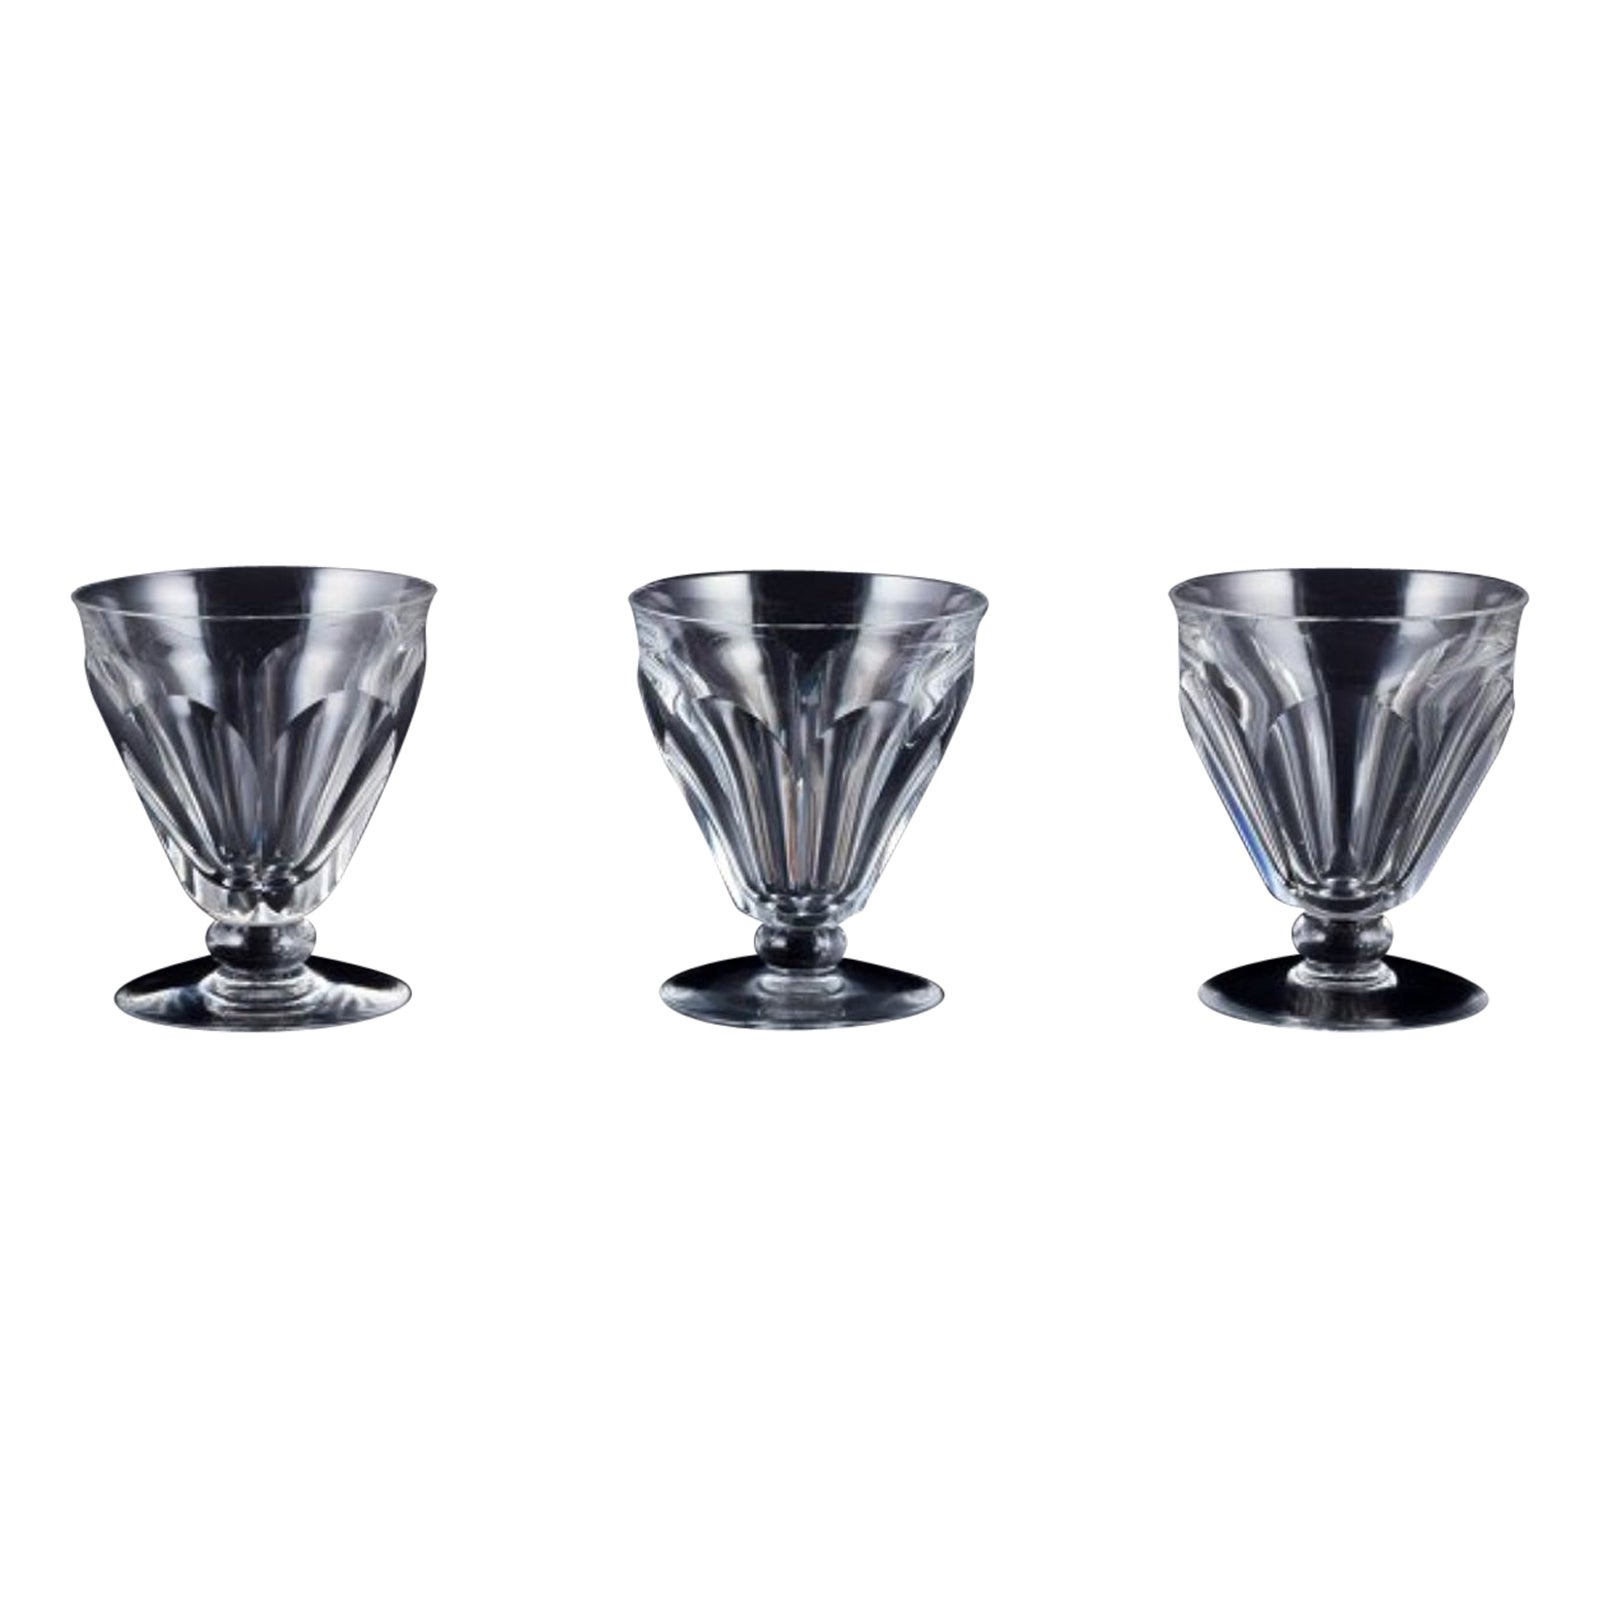 Baccarat, France. Set of three Art Deco red wine glasses in crystal glass